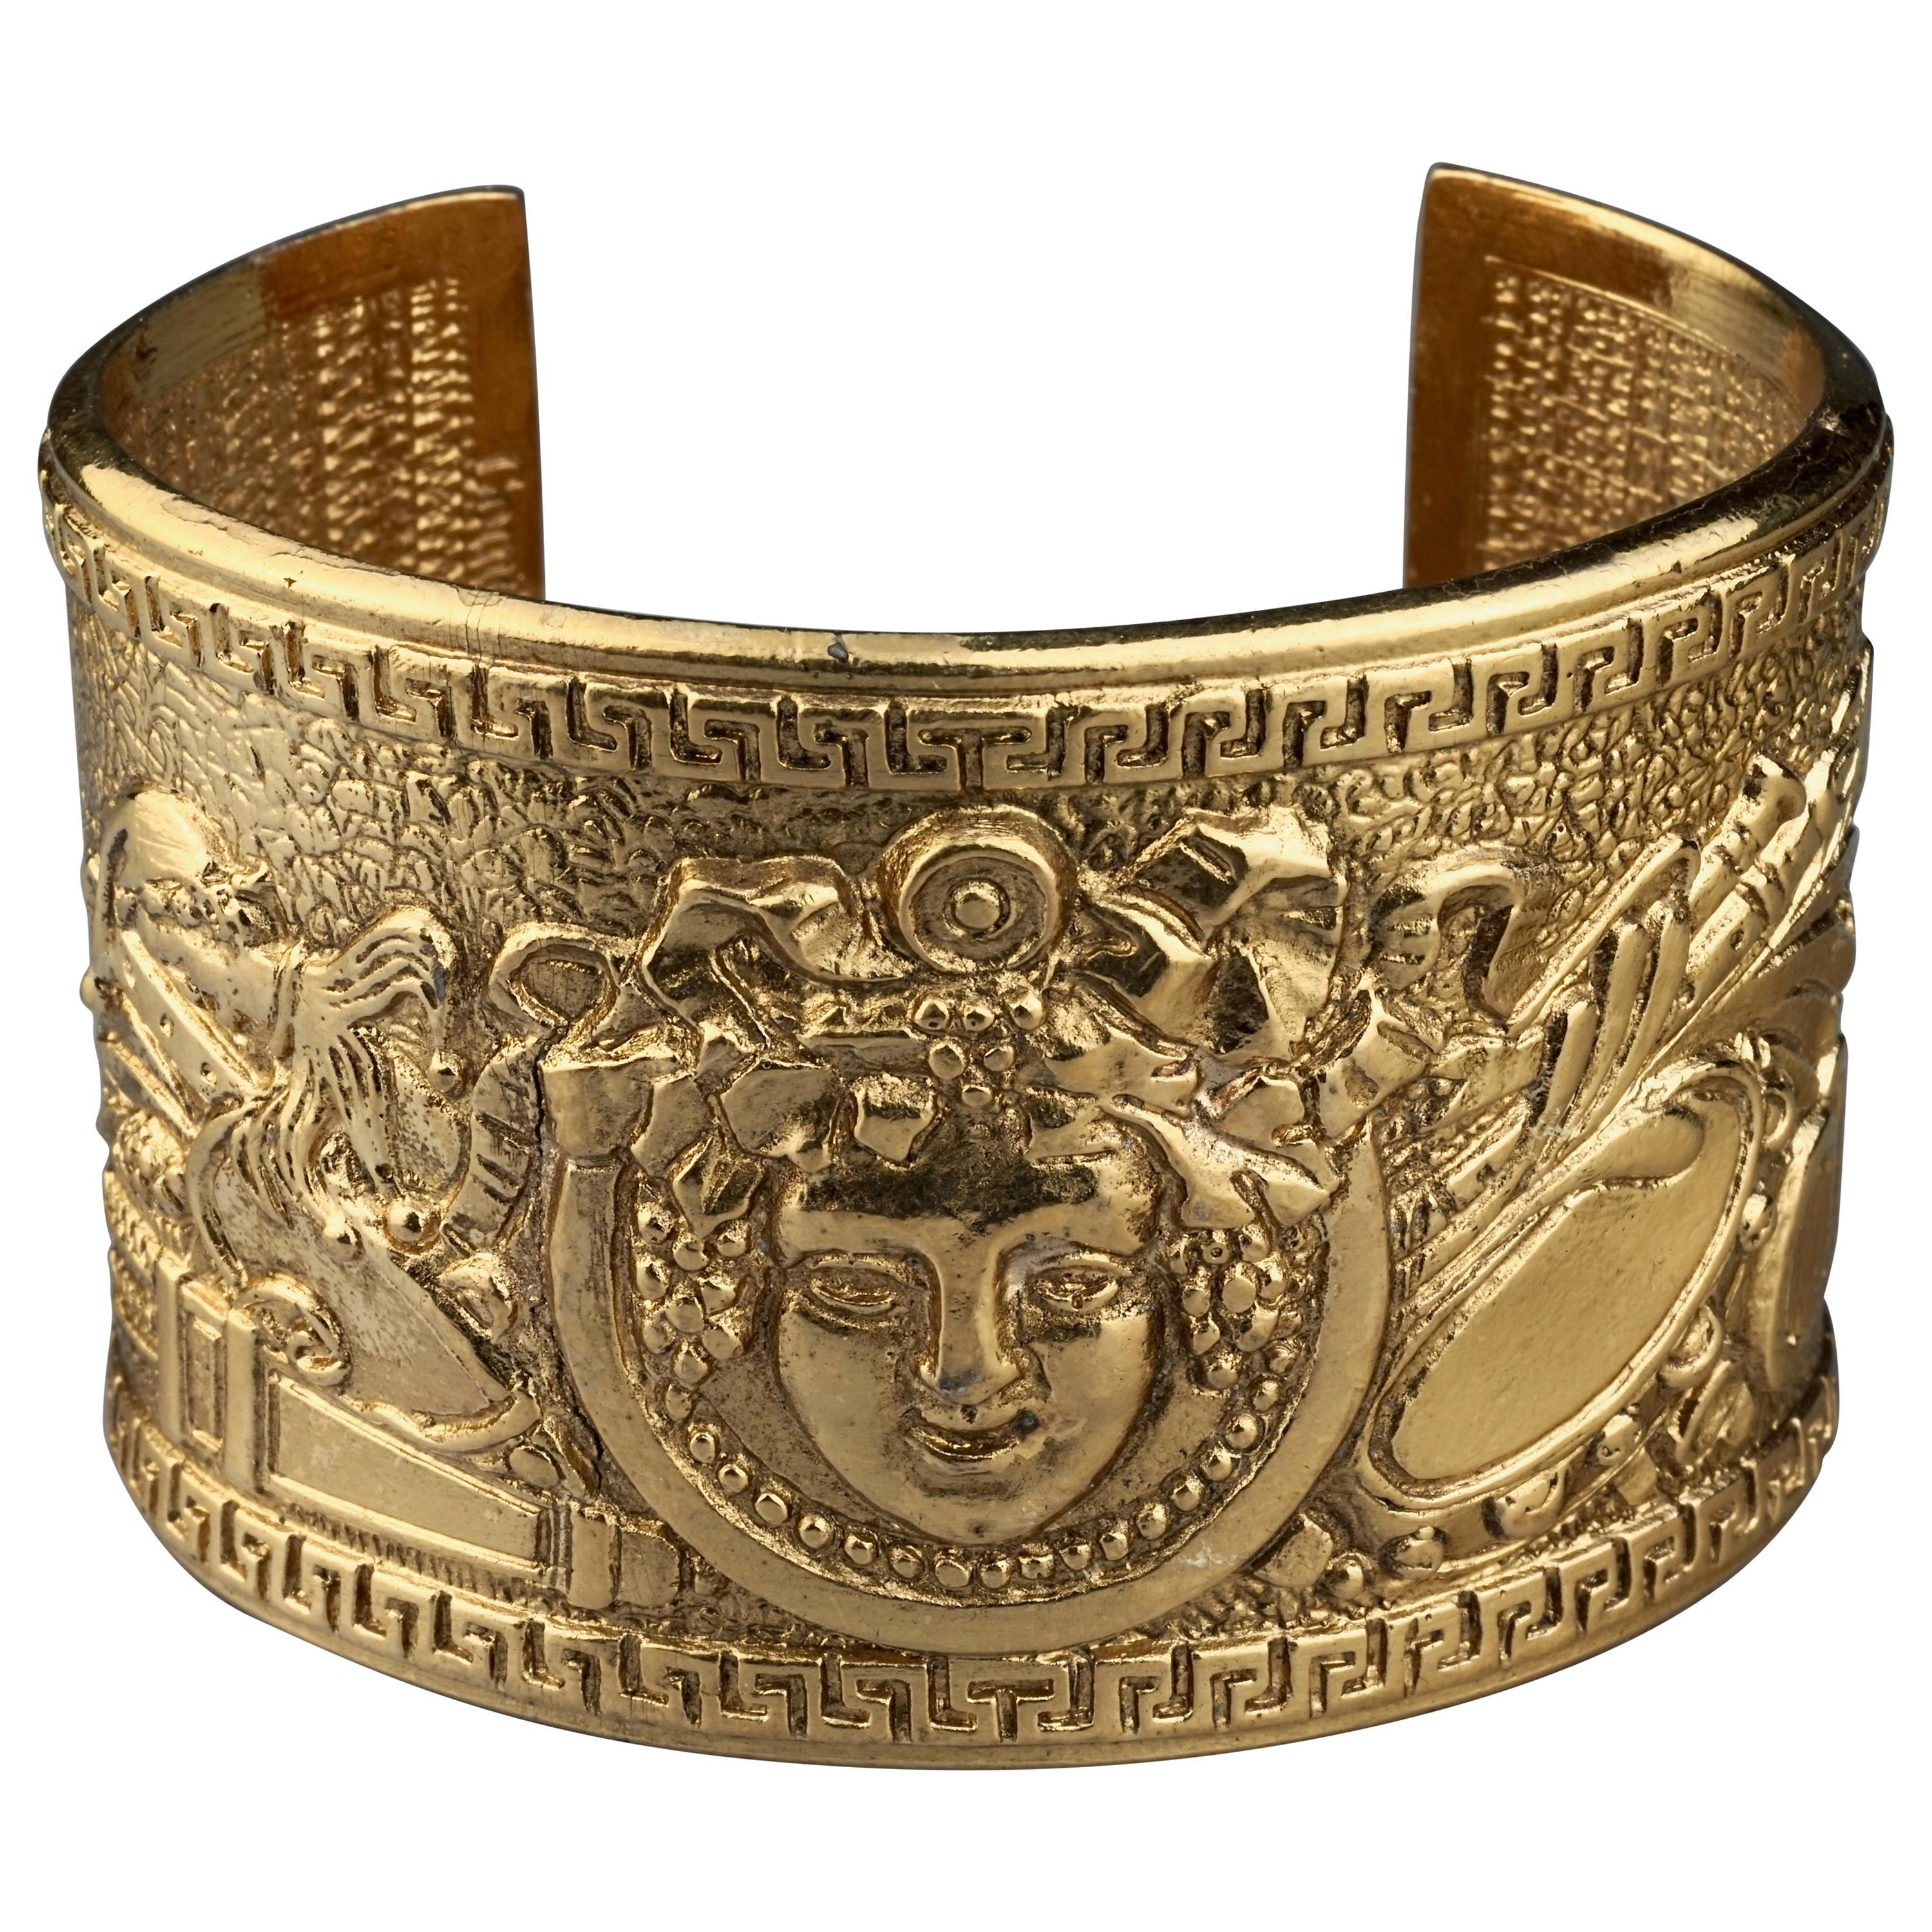 COMEDIE FRANCAISE Bacchus Figural Cuff Bracelet Attributed to Christian Lacroix  For Sale